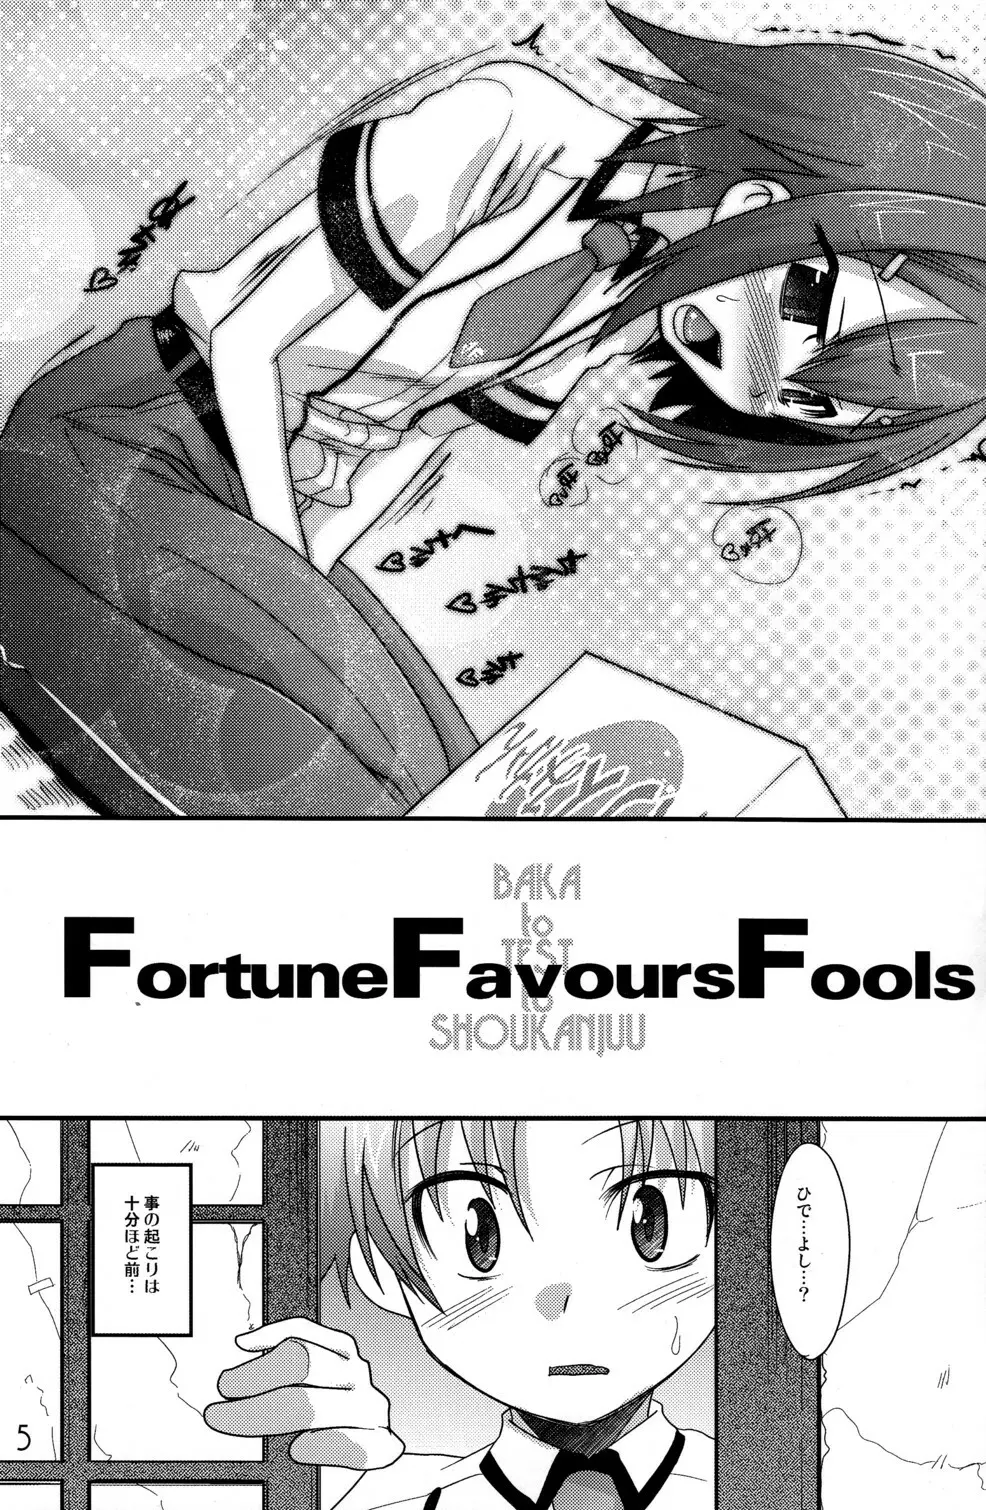 Fortune Favours Fools 4ページ